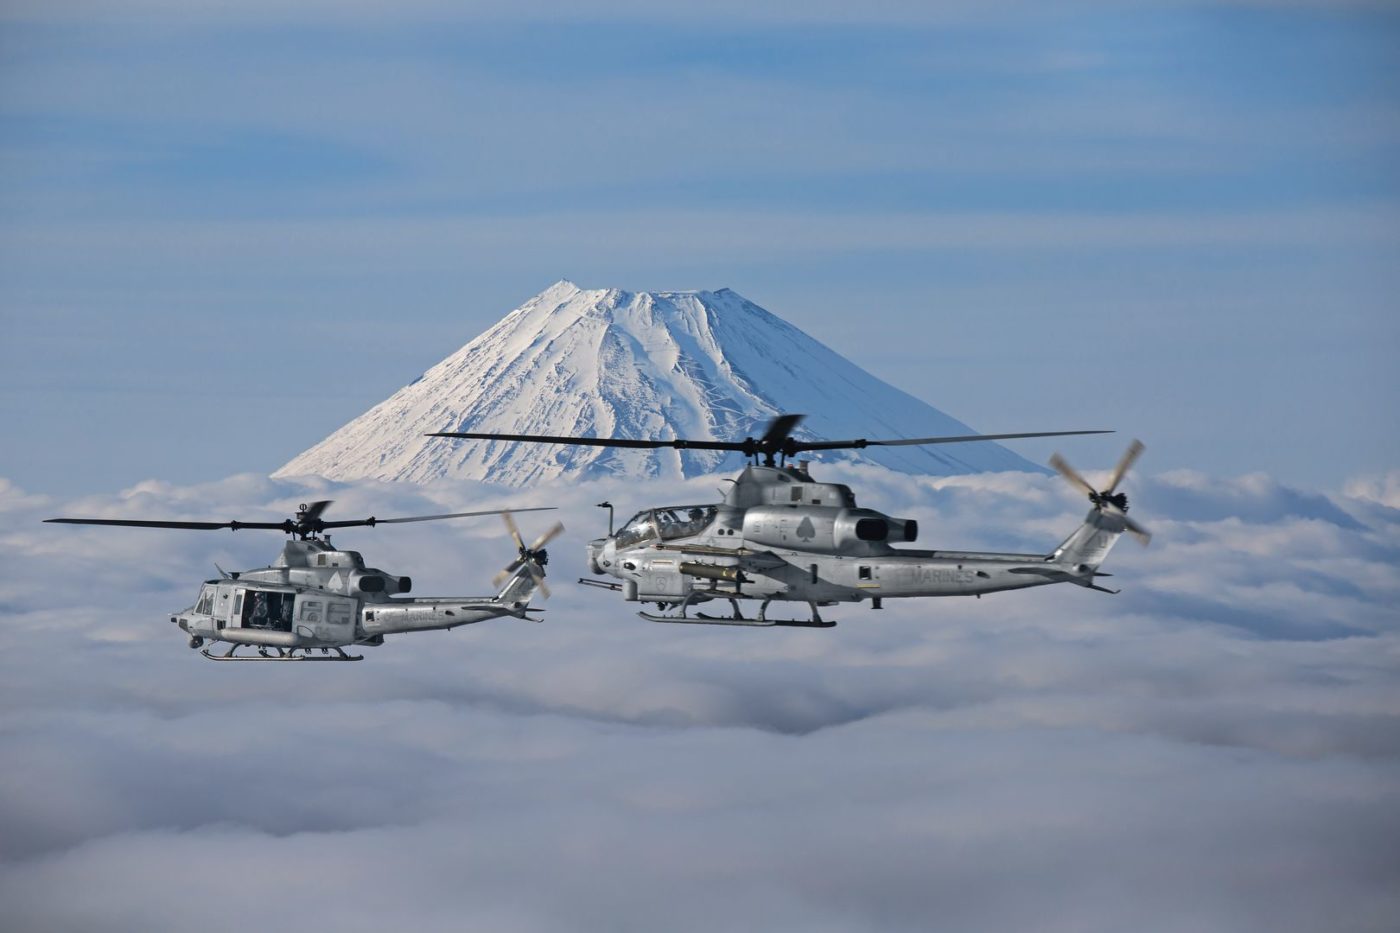 At the show, Bell will showcase its AH-1z aircraft, along with the Bell 505 Jet Ranger X, Bell 429, and a life-size model of its Autonomous Pod Transport. Bell Photo